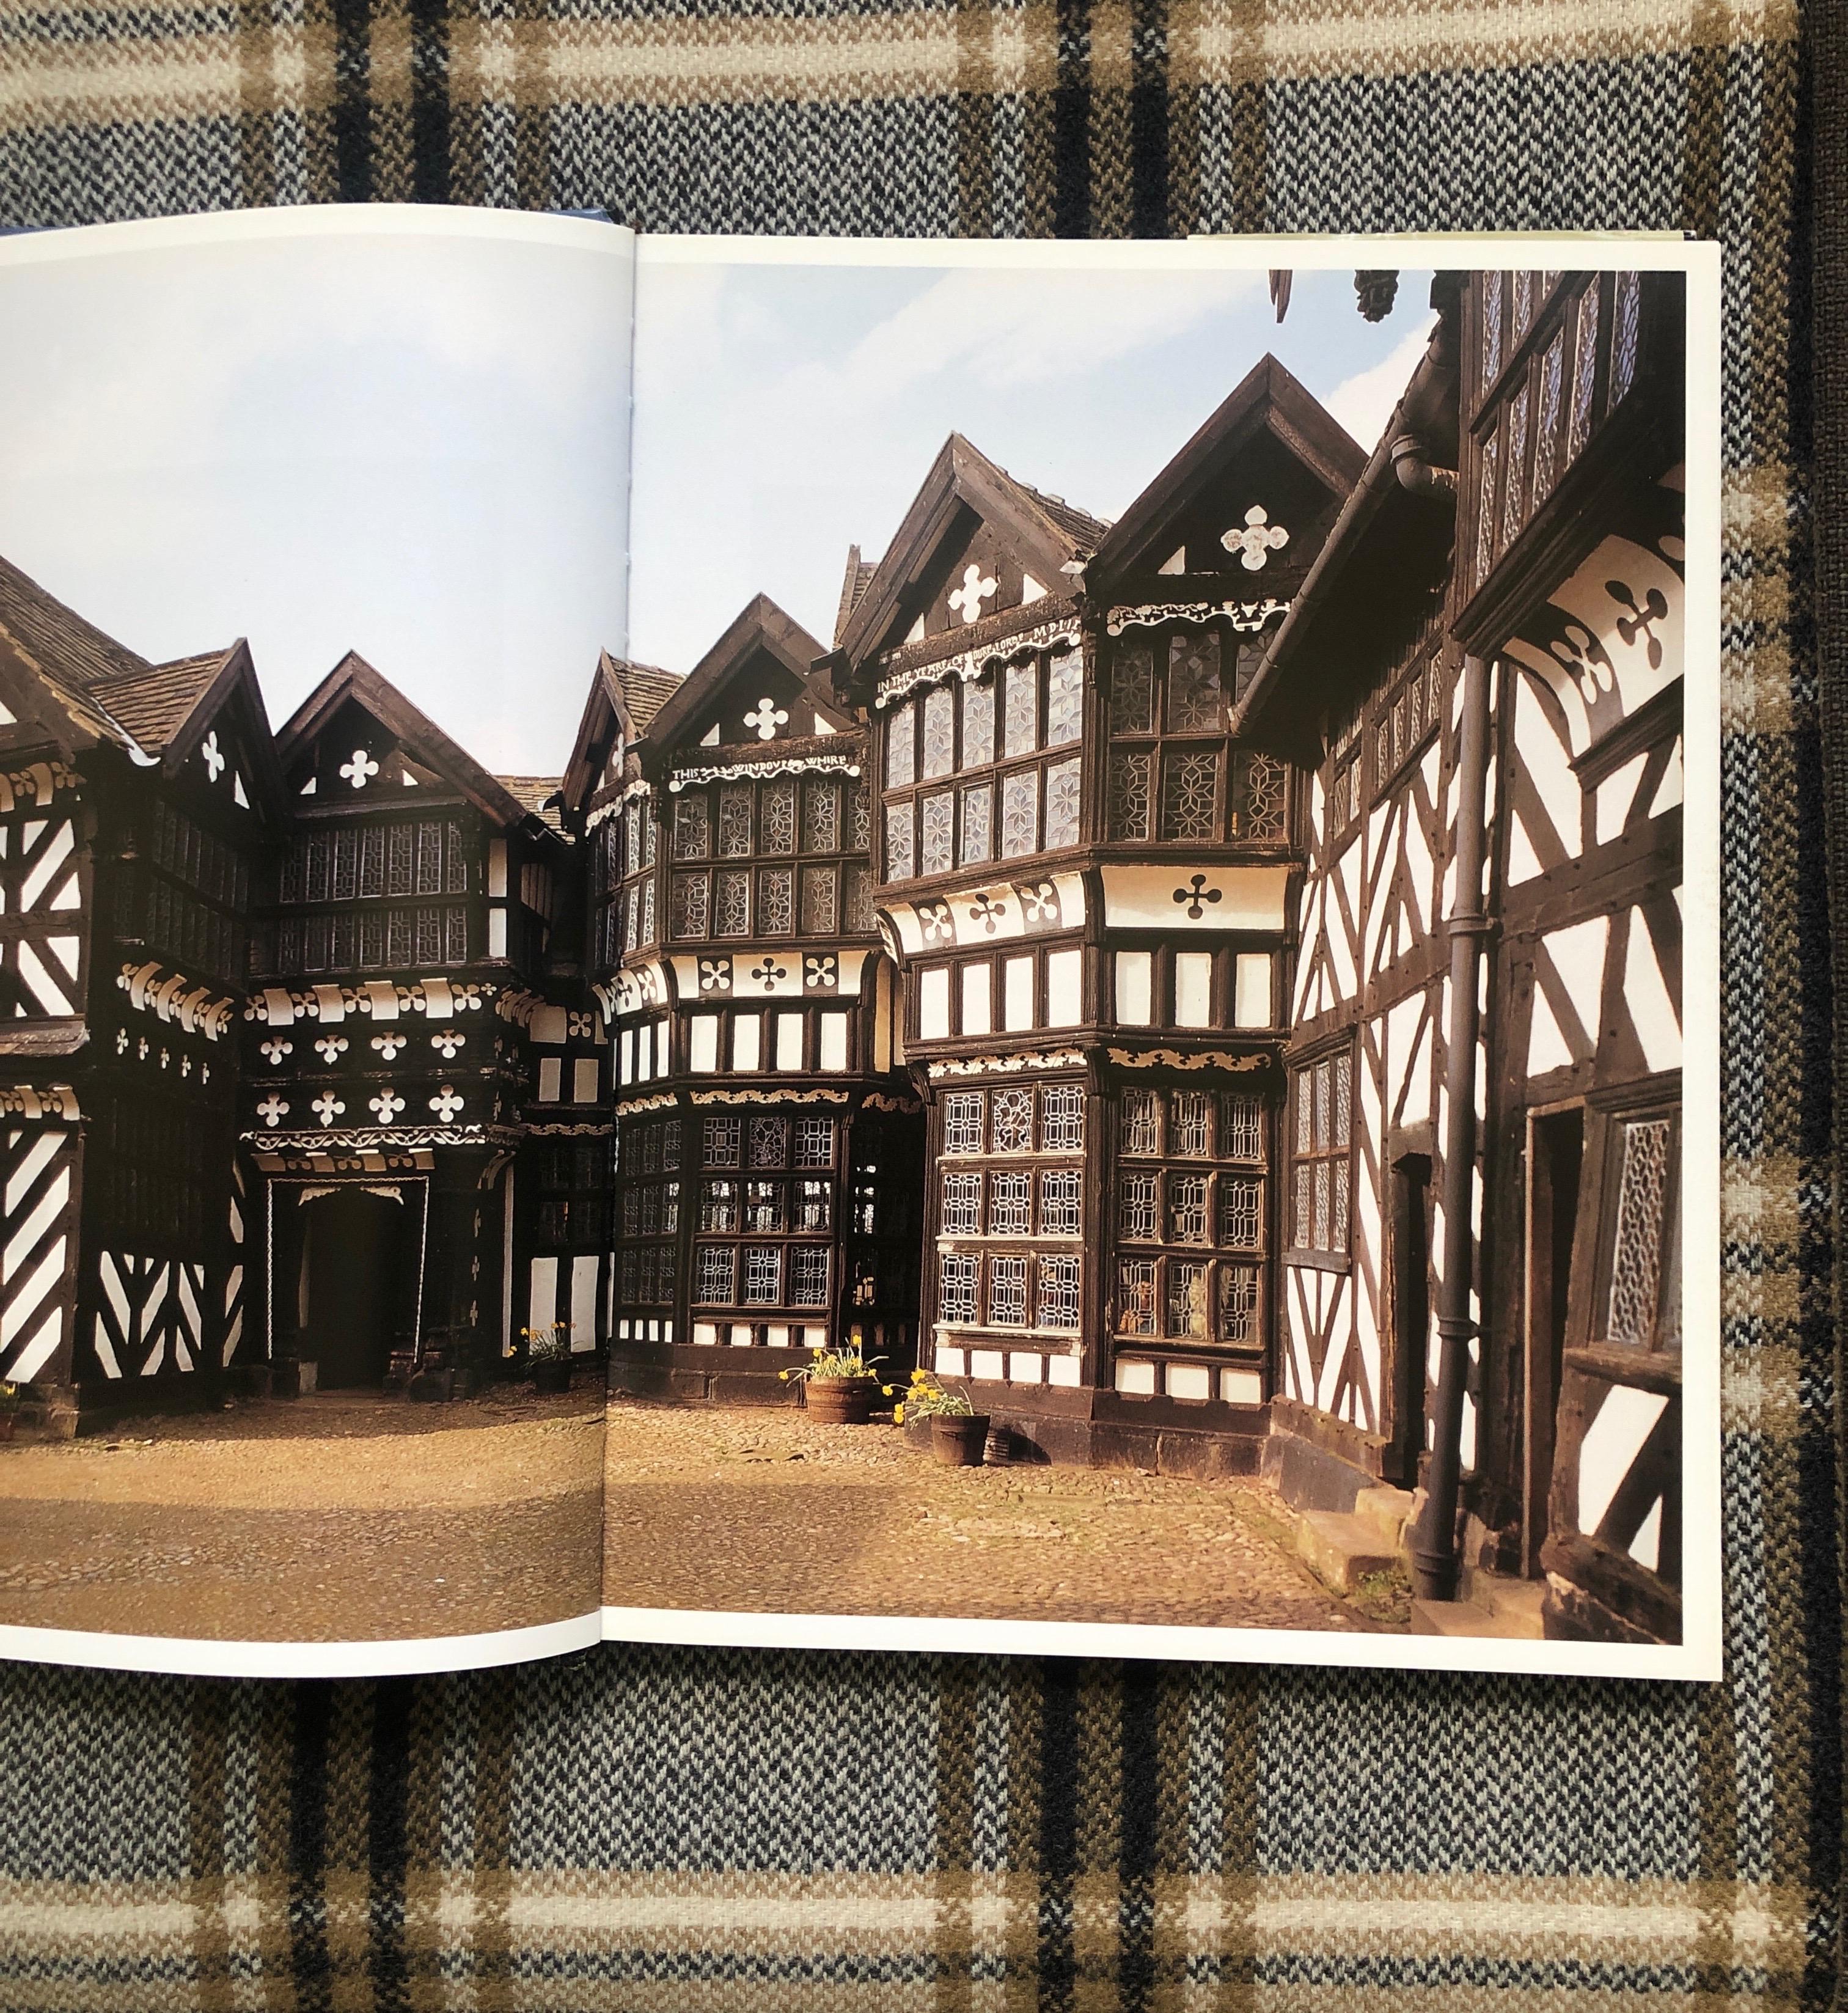 Tudor style: Tudor Revival Houses in America from 1890 to the Present Hardcover
The Tudor house is one of America's keystones, a type of home that has attracted homeowners for more than a century. Its basic elements, the steep gabled roofs,